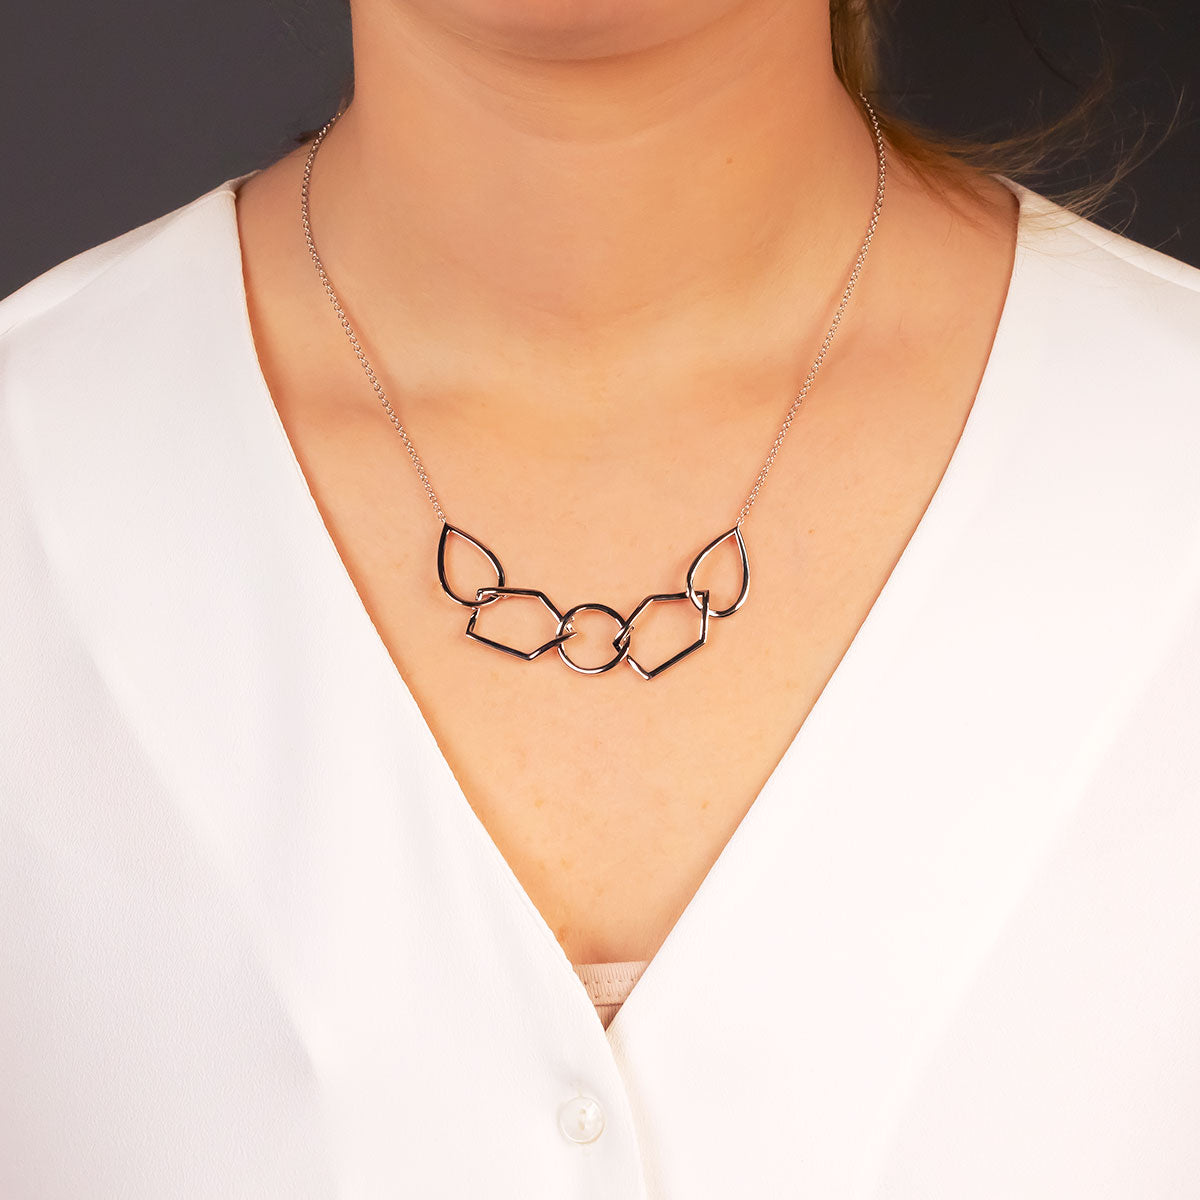 Pinnacle Linked Shapes Necklace - Silver